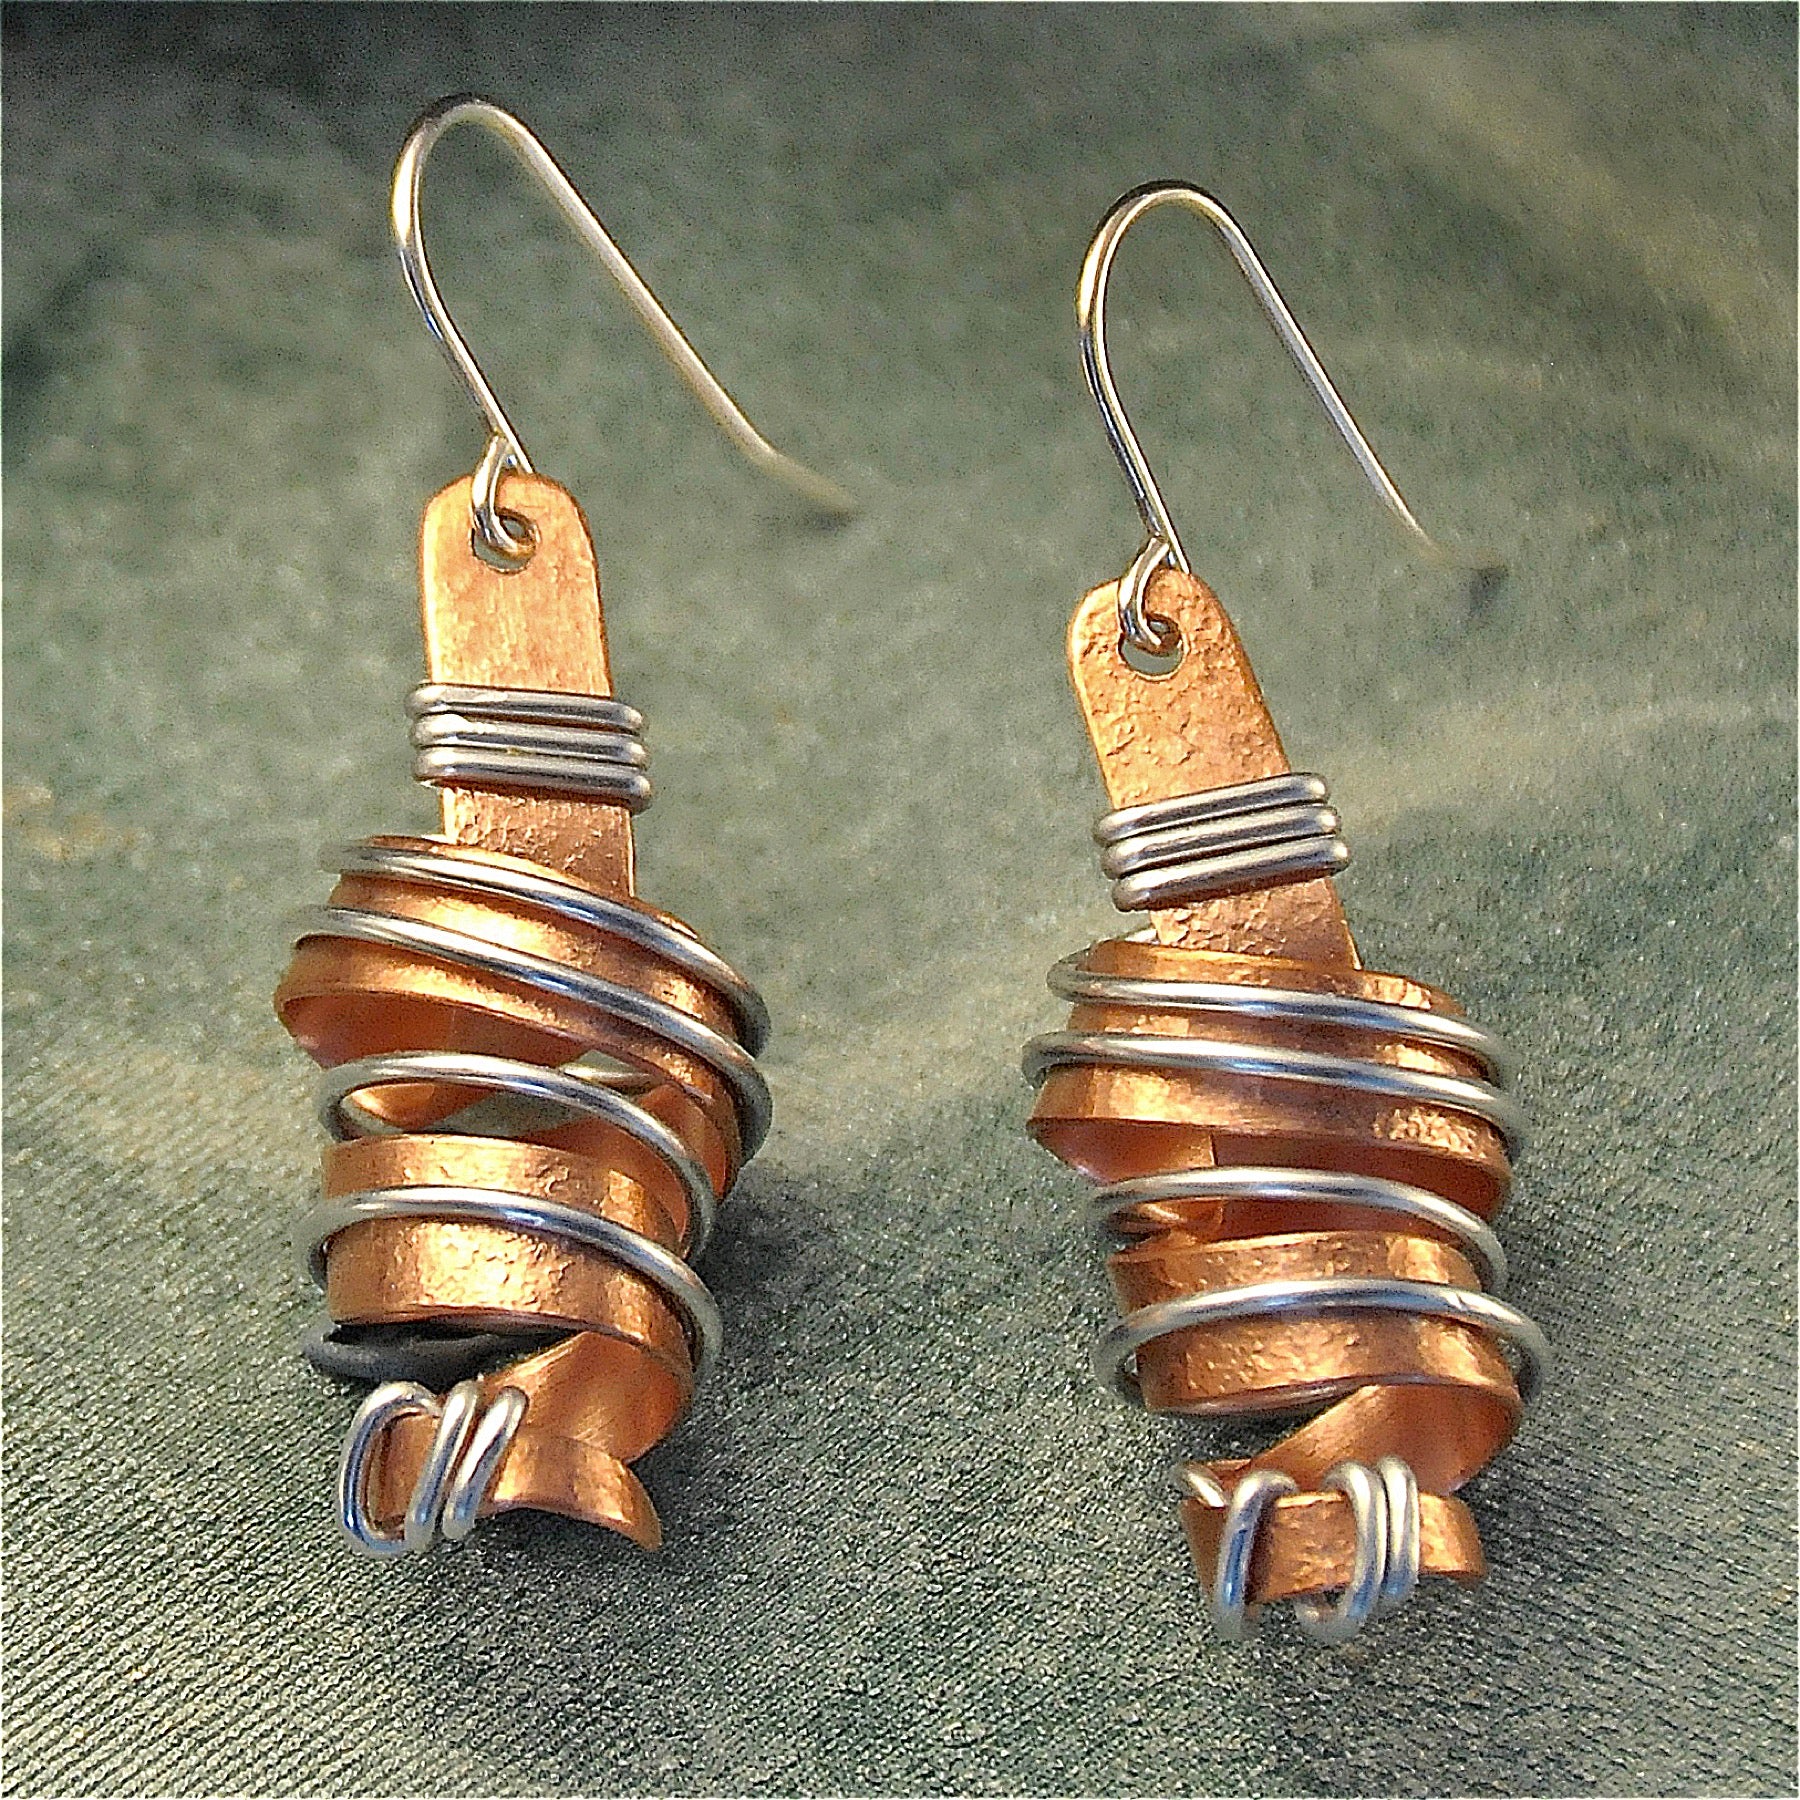 Small wire wrapped twirly copper earrings